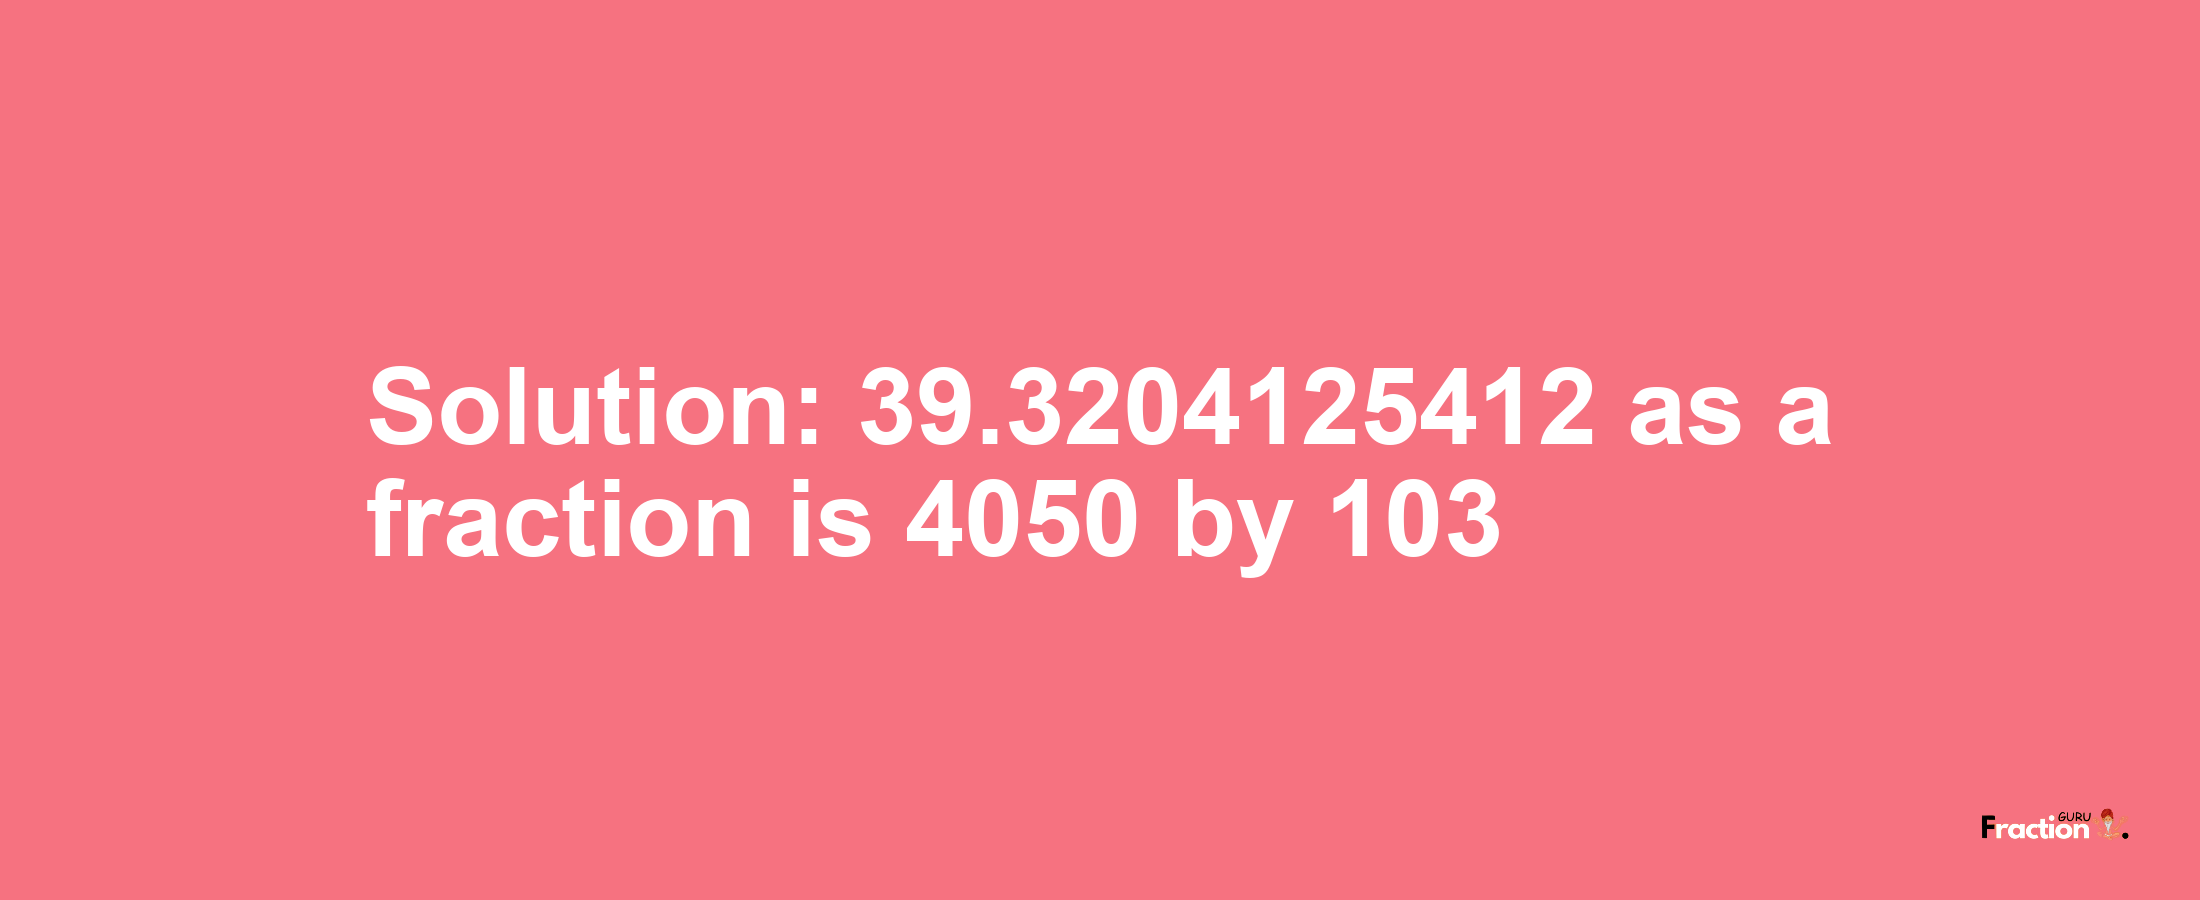 Solution:39.3204125412 as a fraction is 4050/103